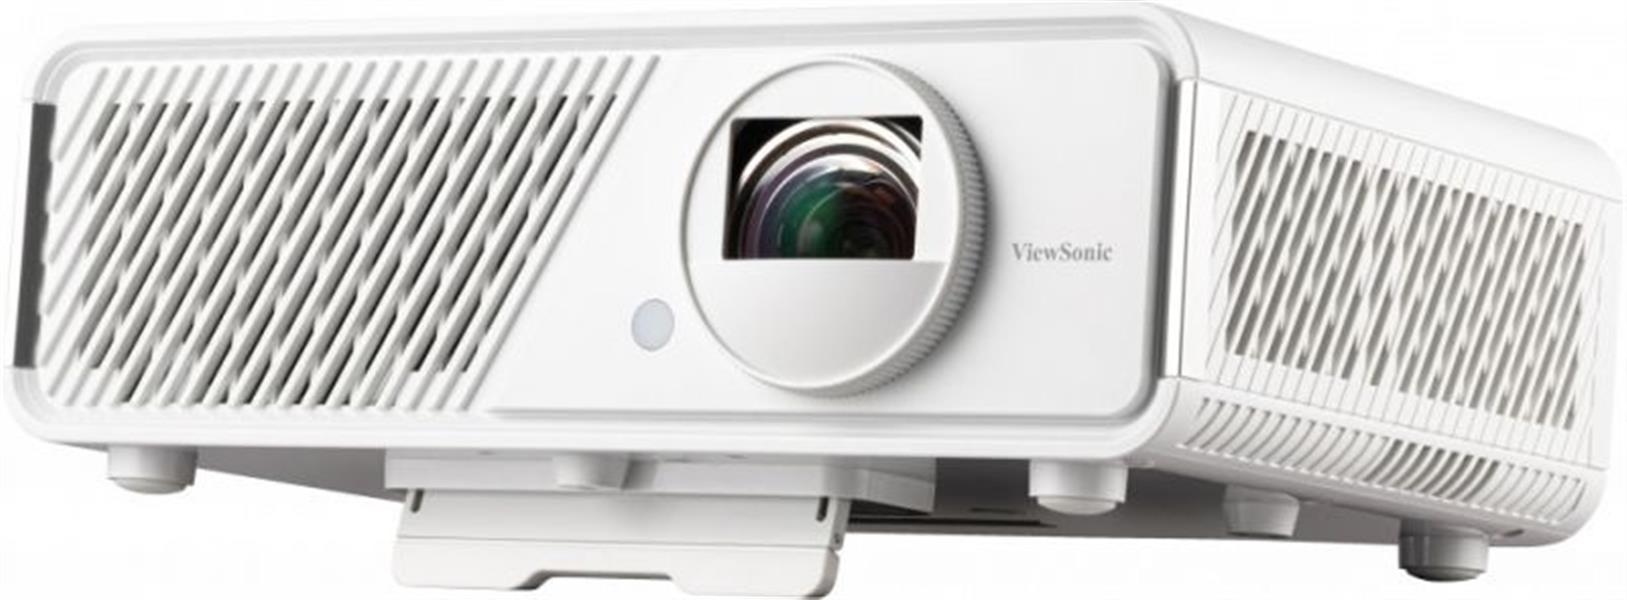  - LED Projector - 2300 ANSI Lumens - 2x6W Speakers - Bluetooth - Wifi - Short throw